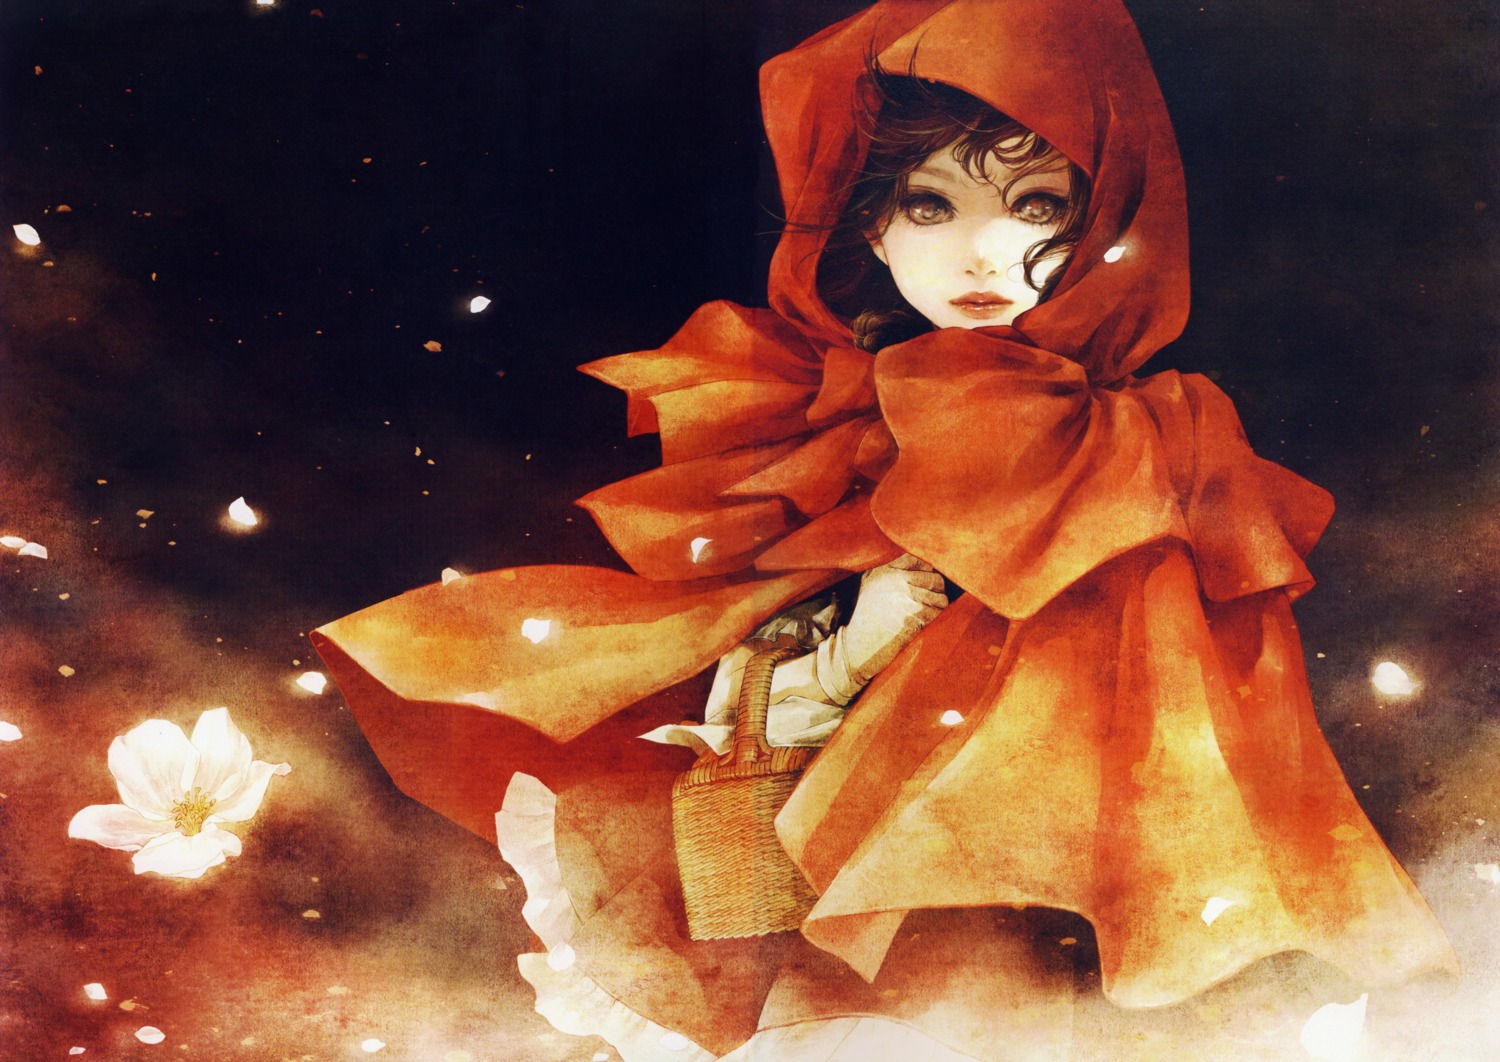 enta_shiho little_red_riding_hood_(character)